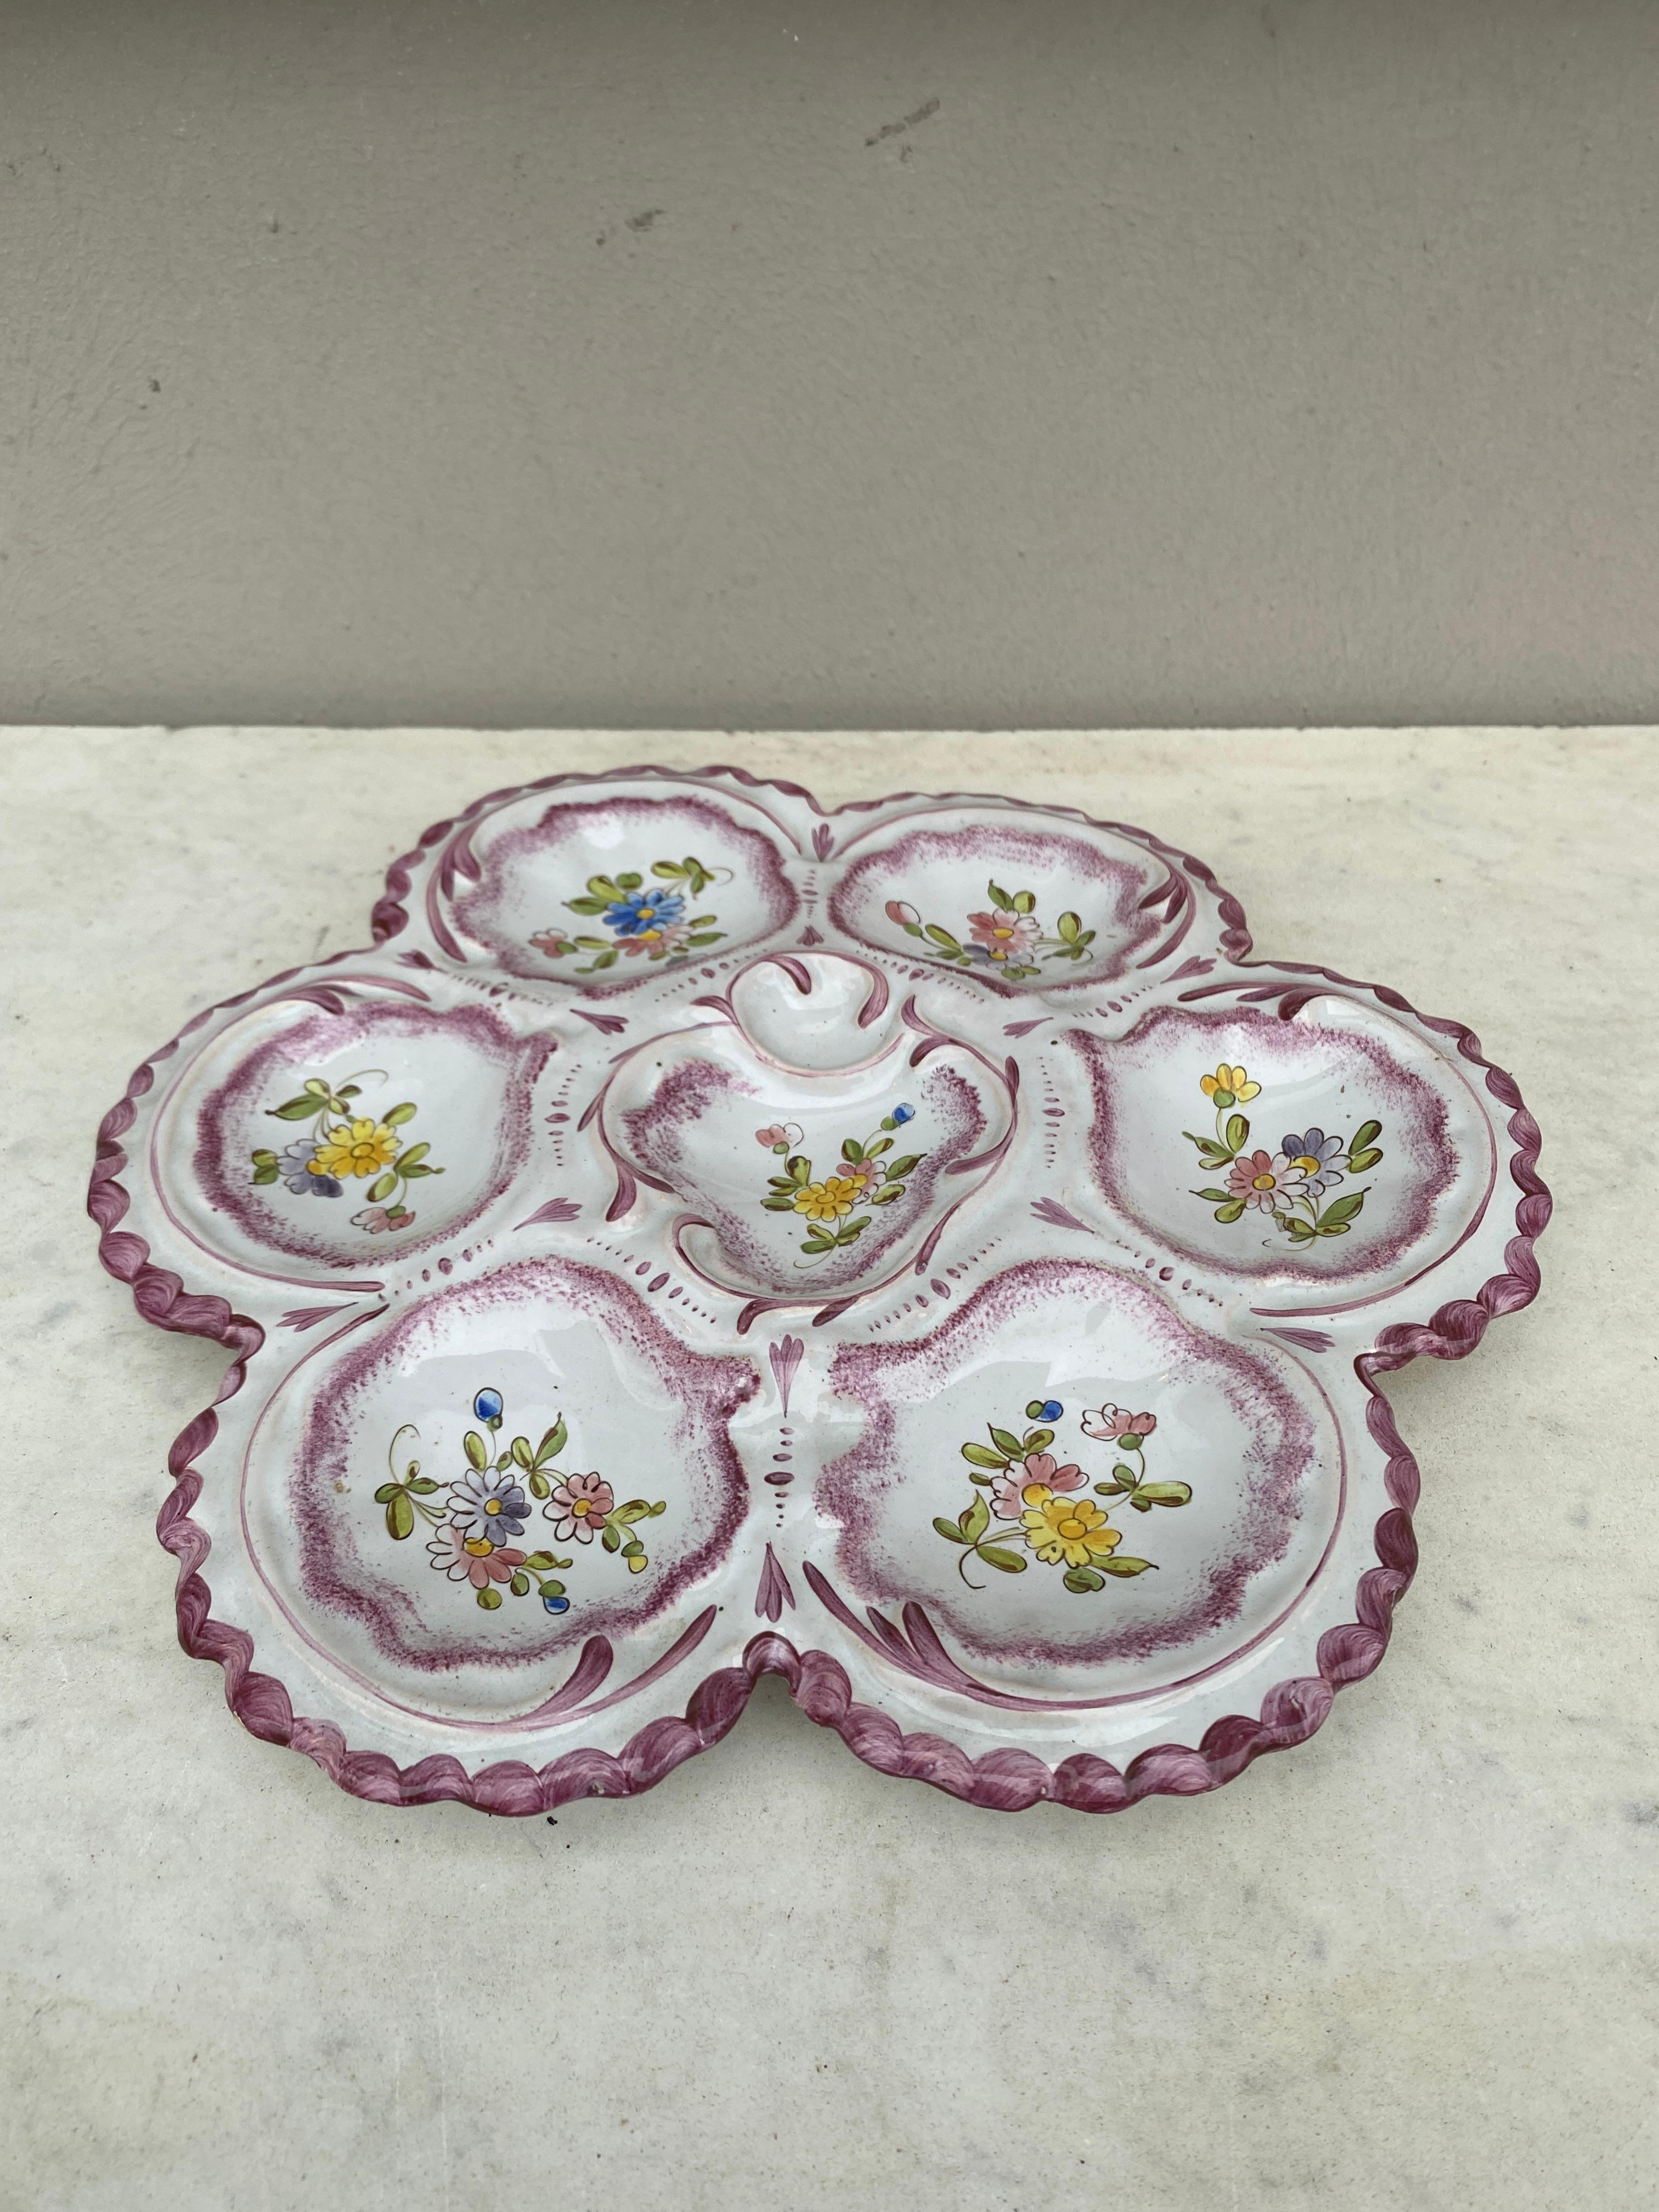 Lovely large French faience oyster plate in pastel colors with flowers, circa 1900 signed Alfred Renoleau Angouleme.